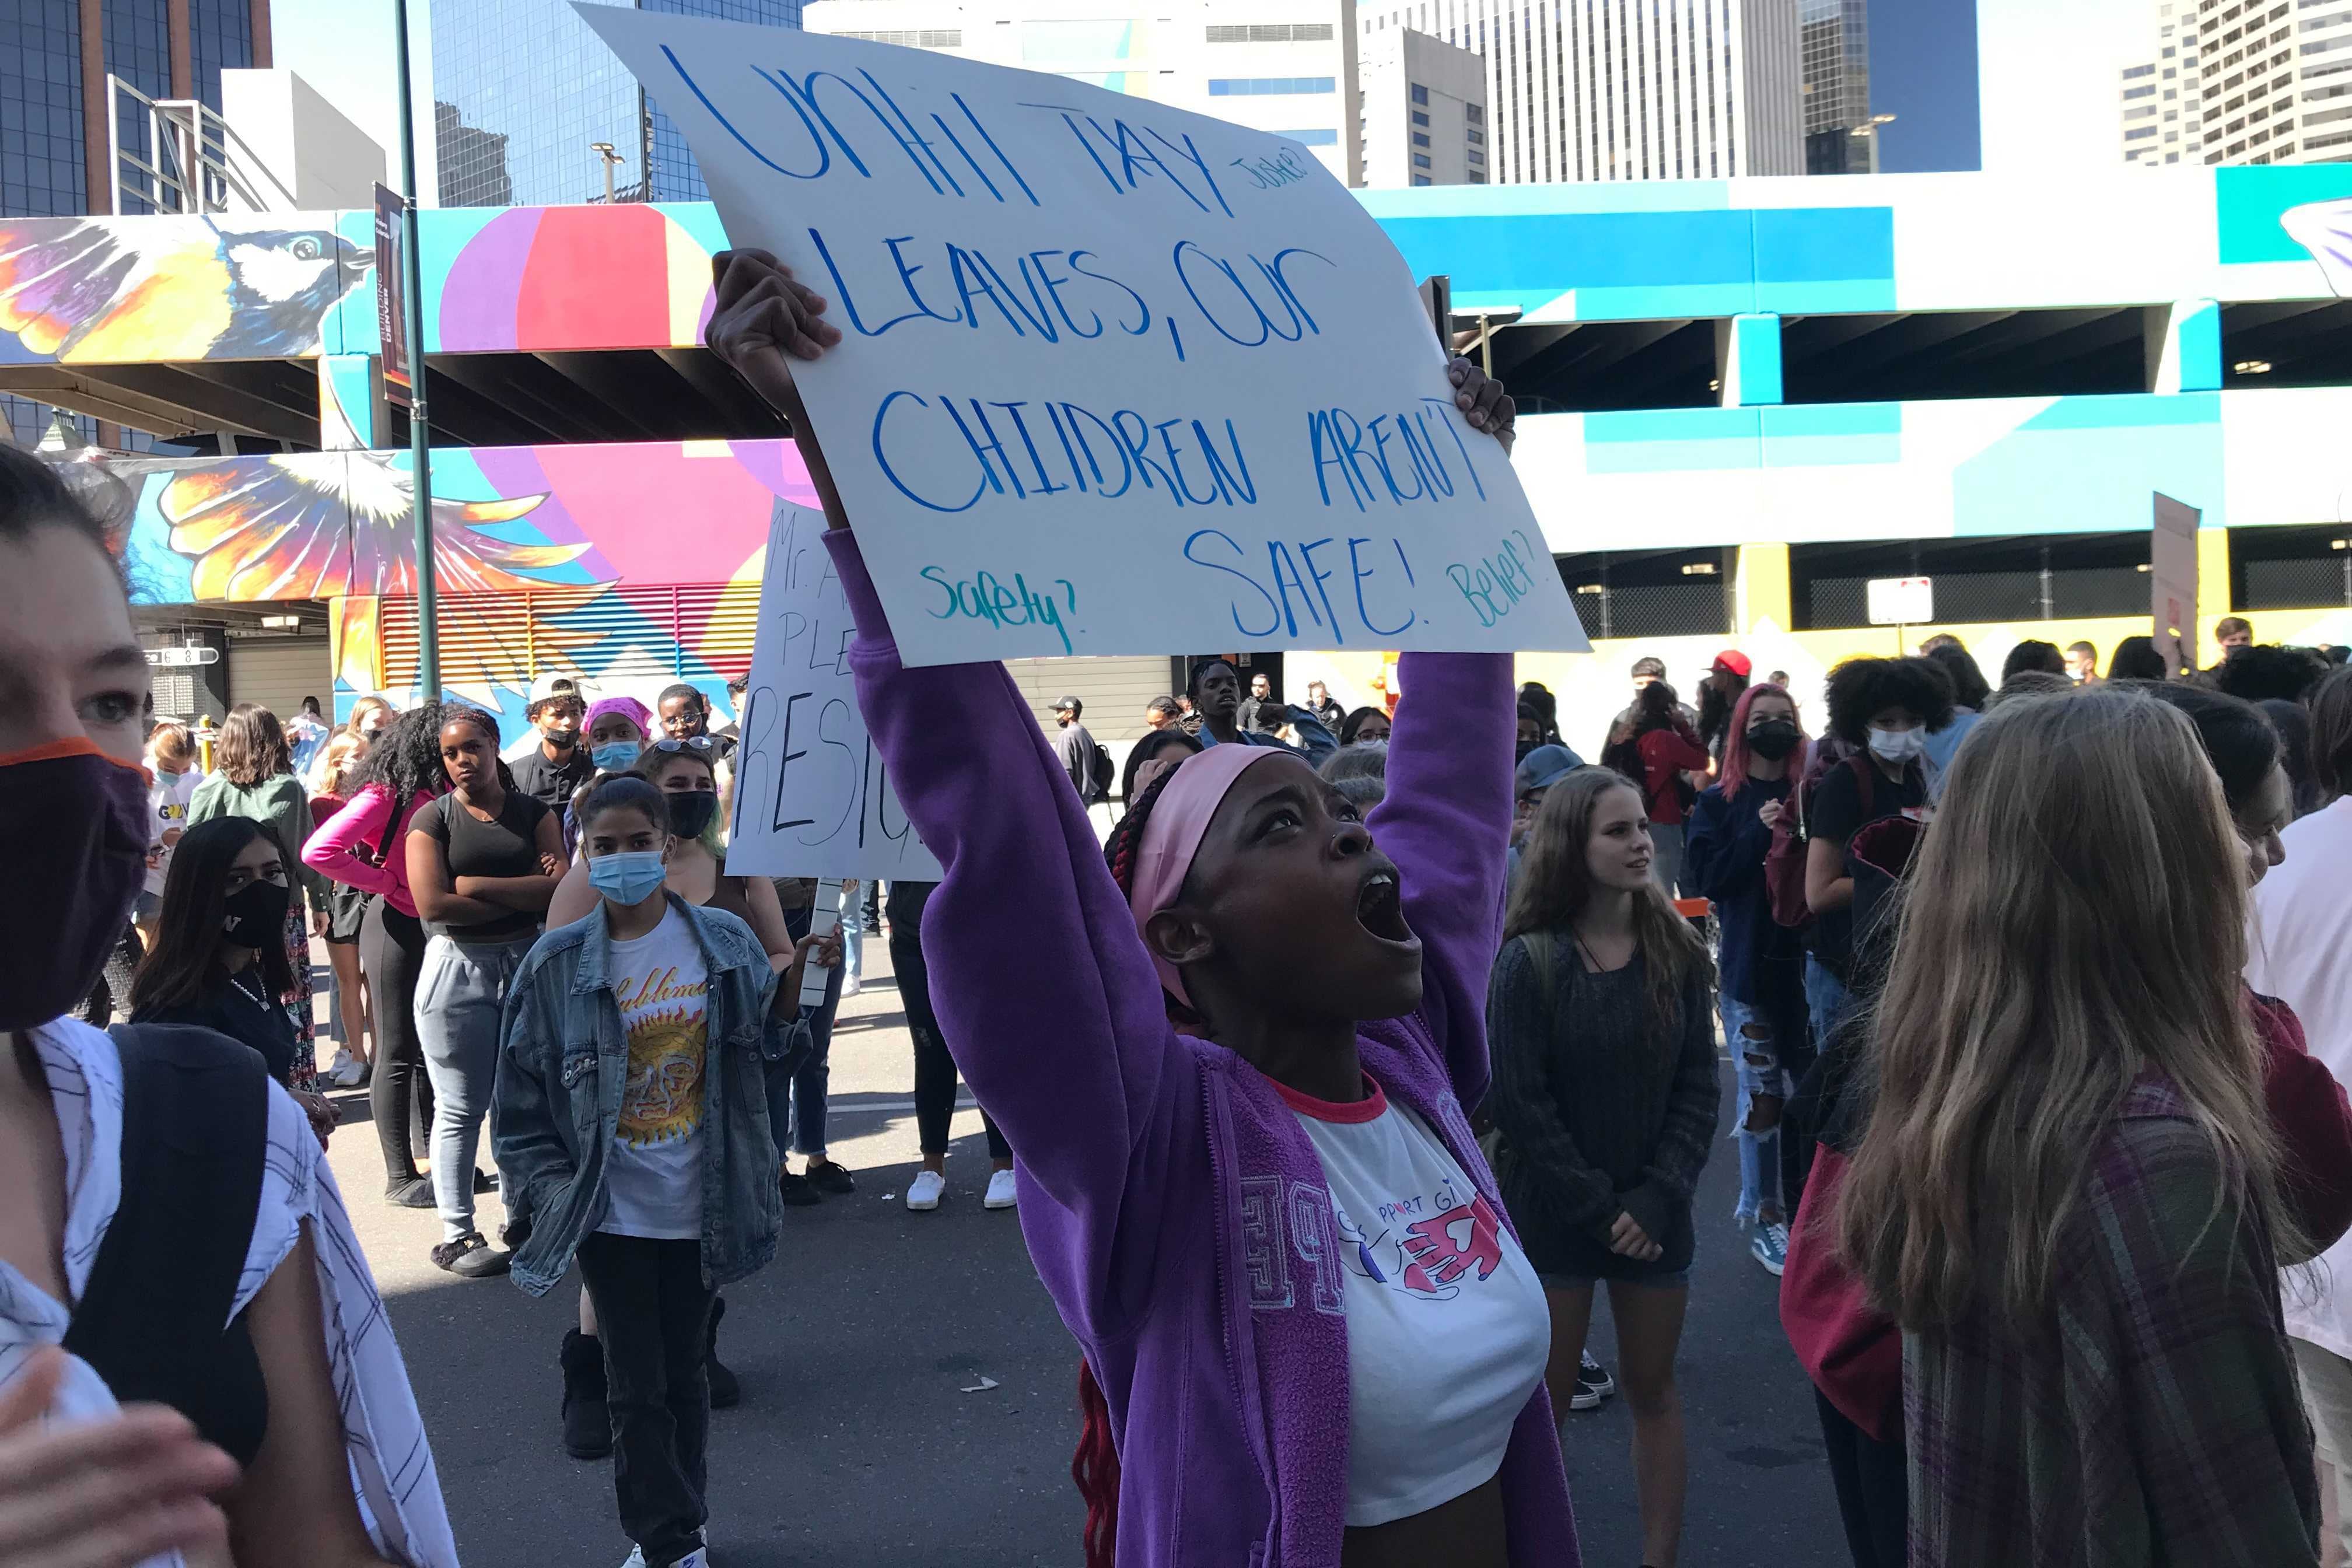 A high school student wearing a purple sweatshirt stands in a crowd. Her arms are raised, holding a sign that reads “Until Tay leaves, our children aren’t safe.” She is shouting.